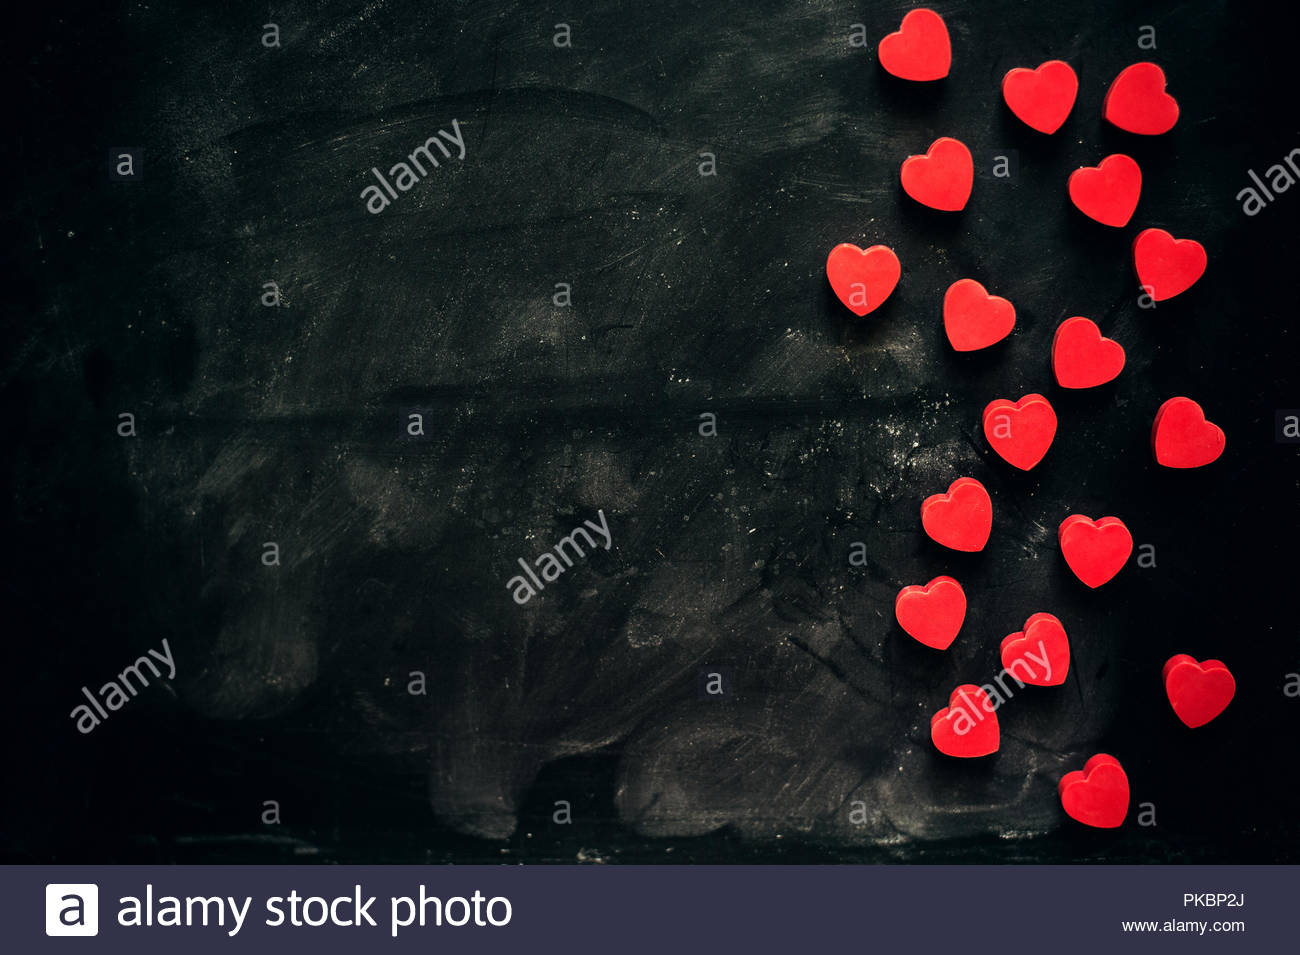 Lots Of Little Red Hearts On Black Background Romantic Love